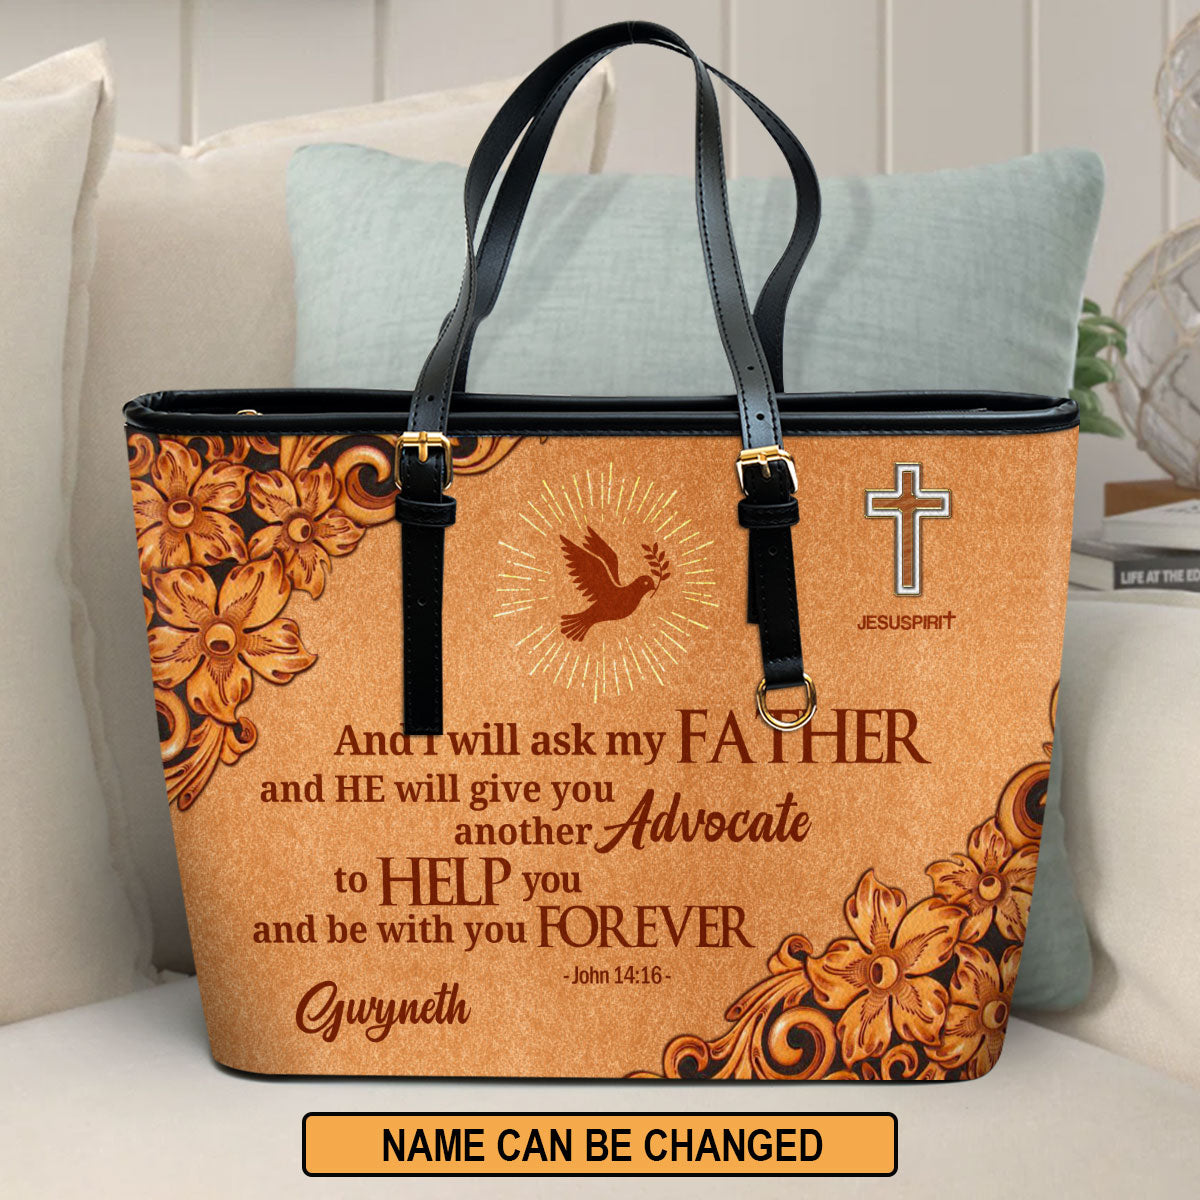 Christian Tote Bag Faith Based Gifts Womens Christian Gifts Bible